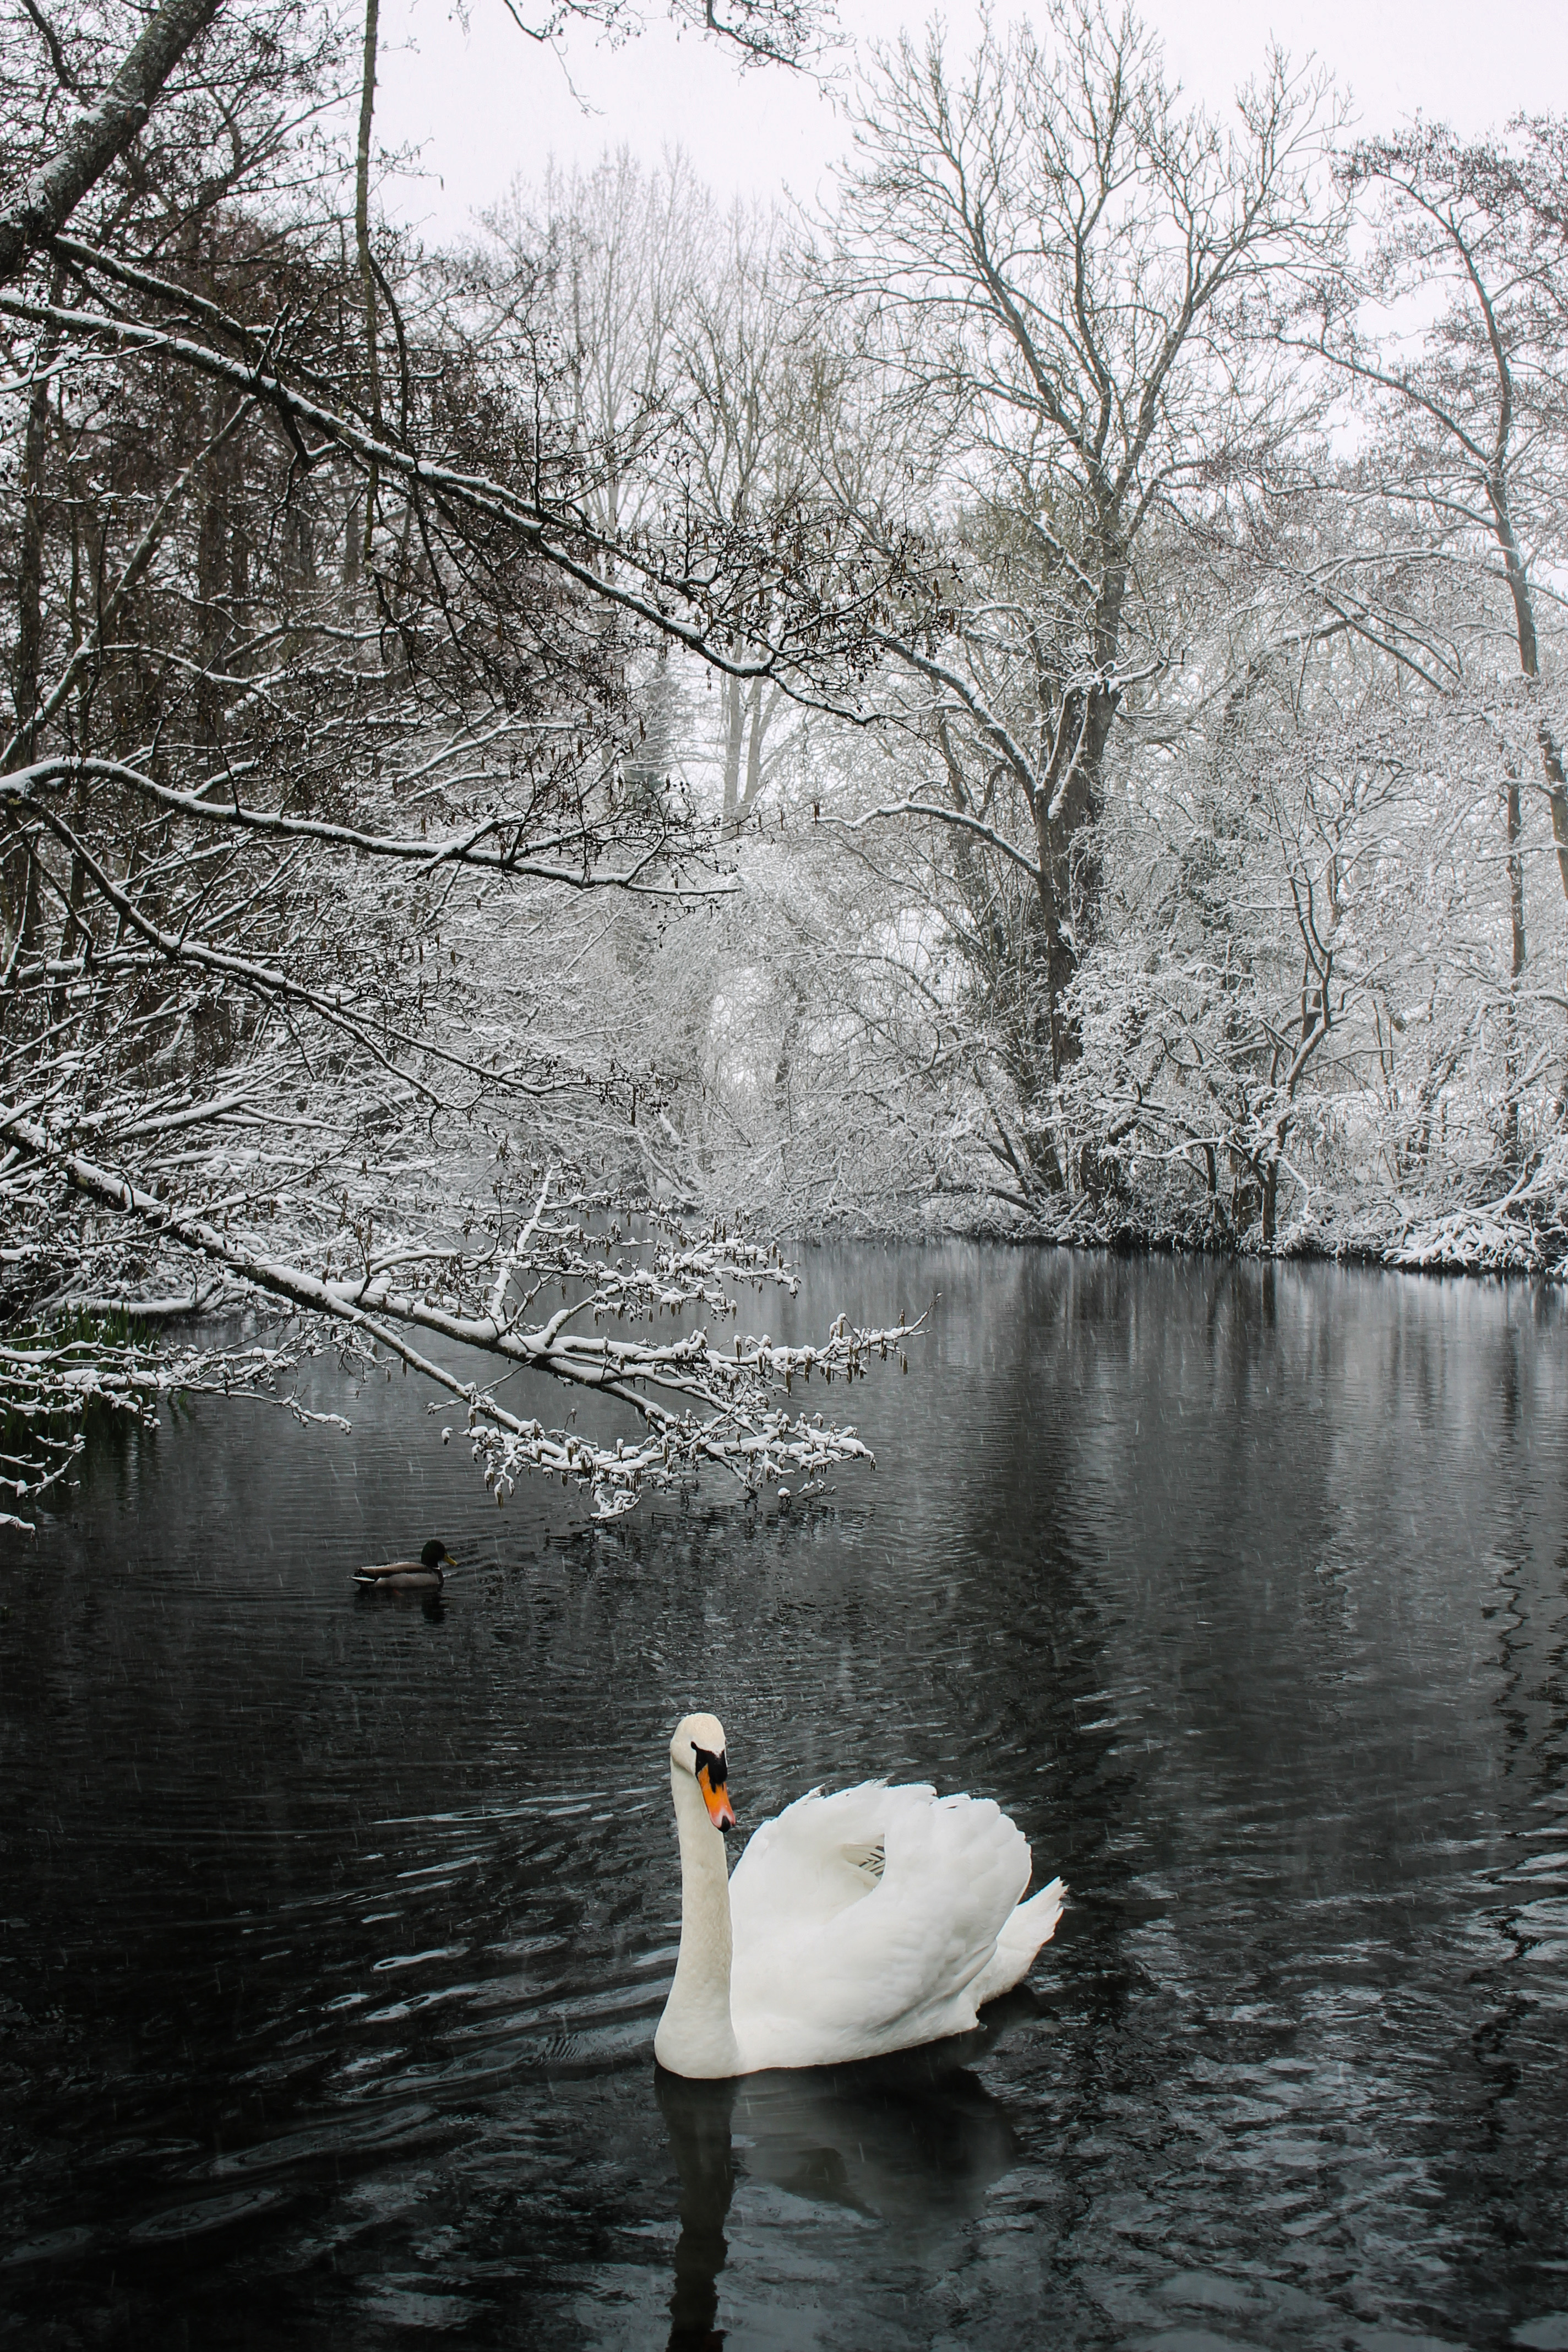 springhead in winter with swan